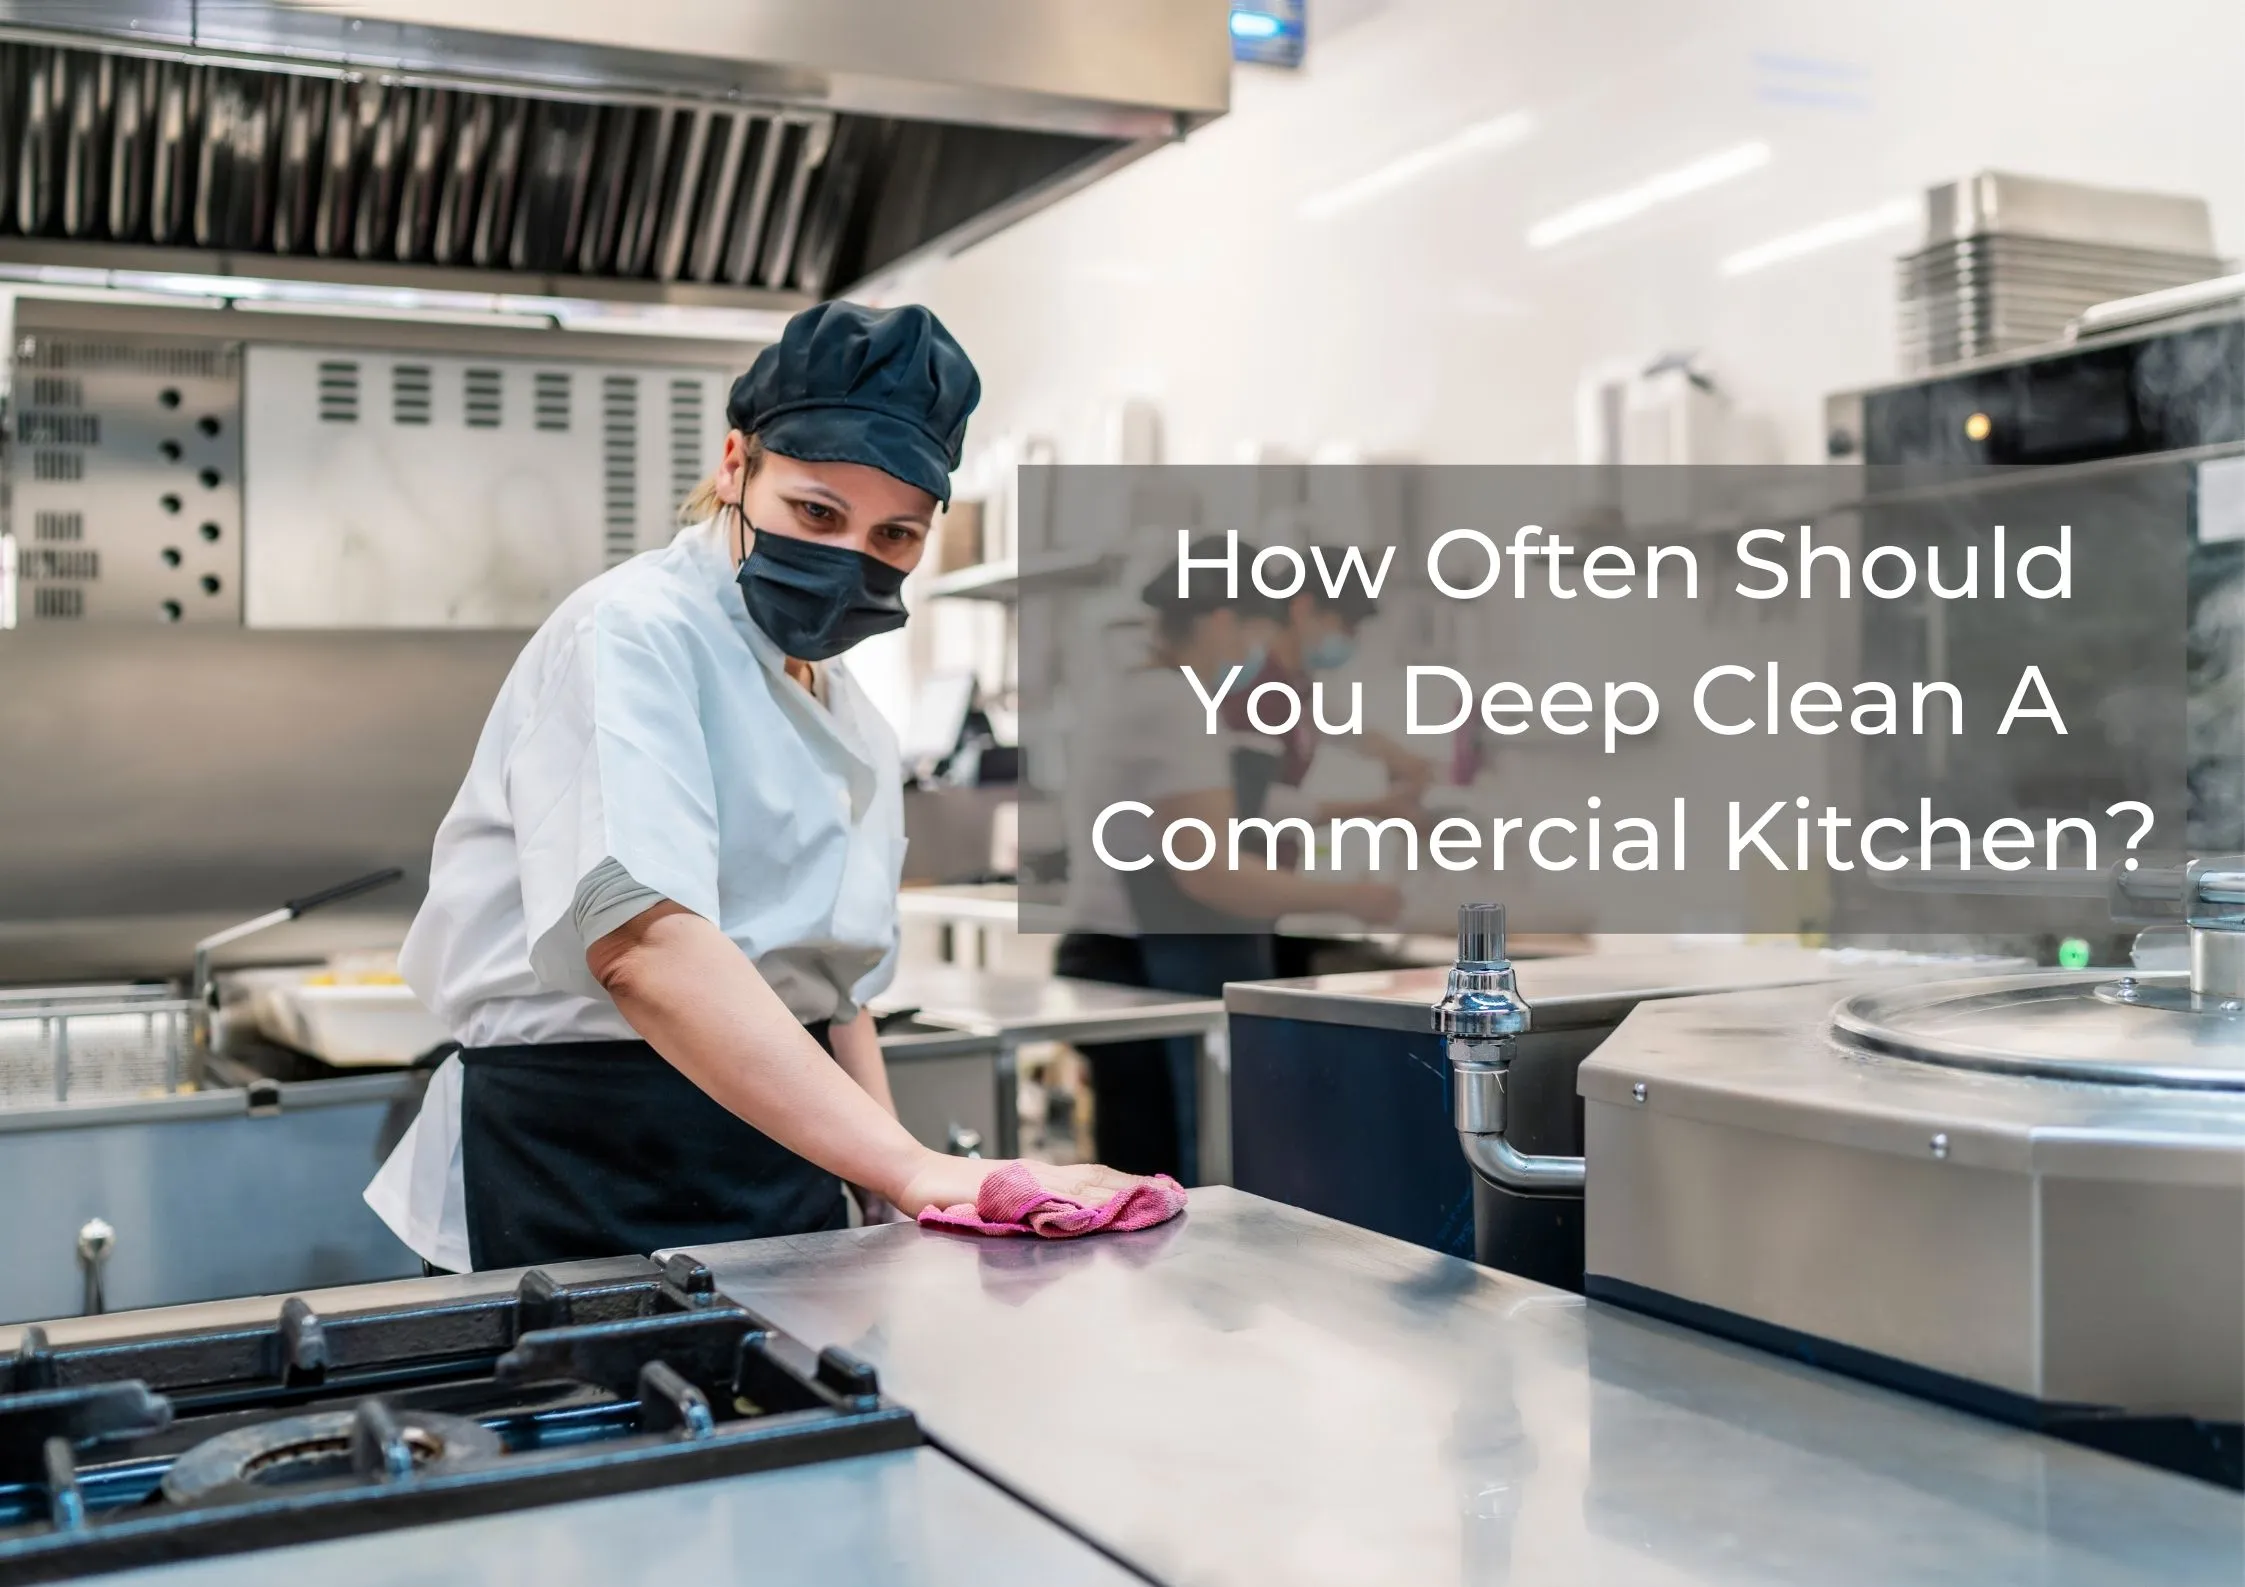 How Often Should You Deep Clean A Commercial Kitchen